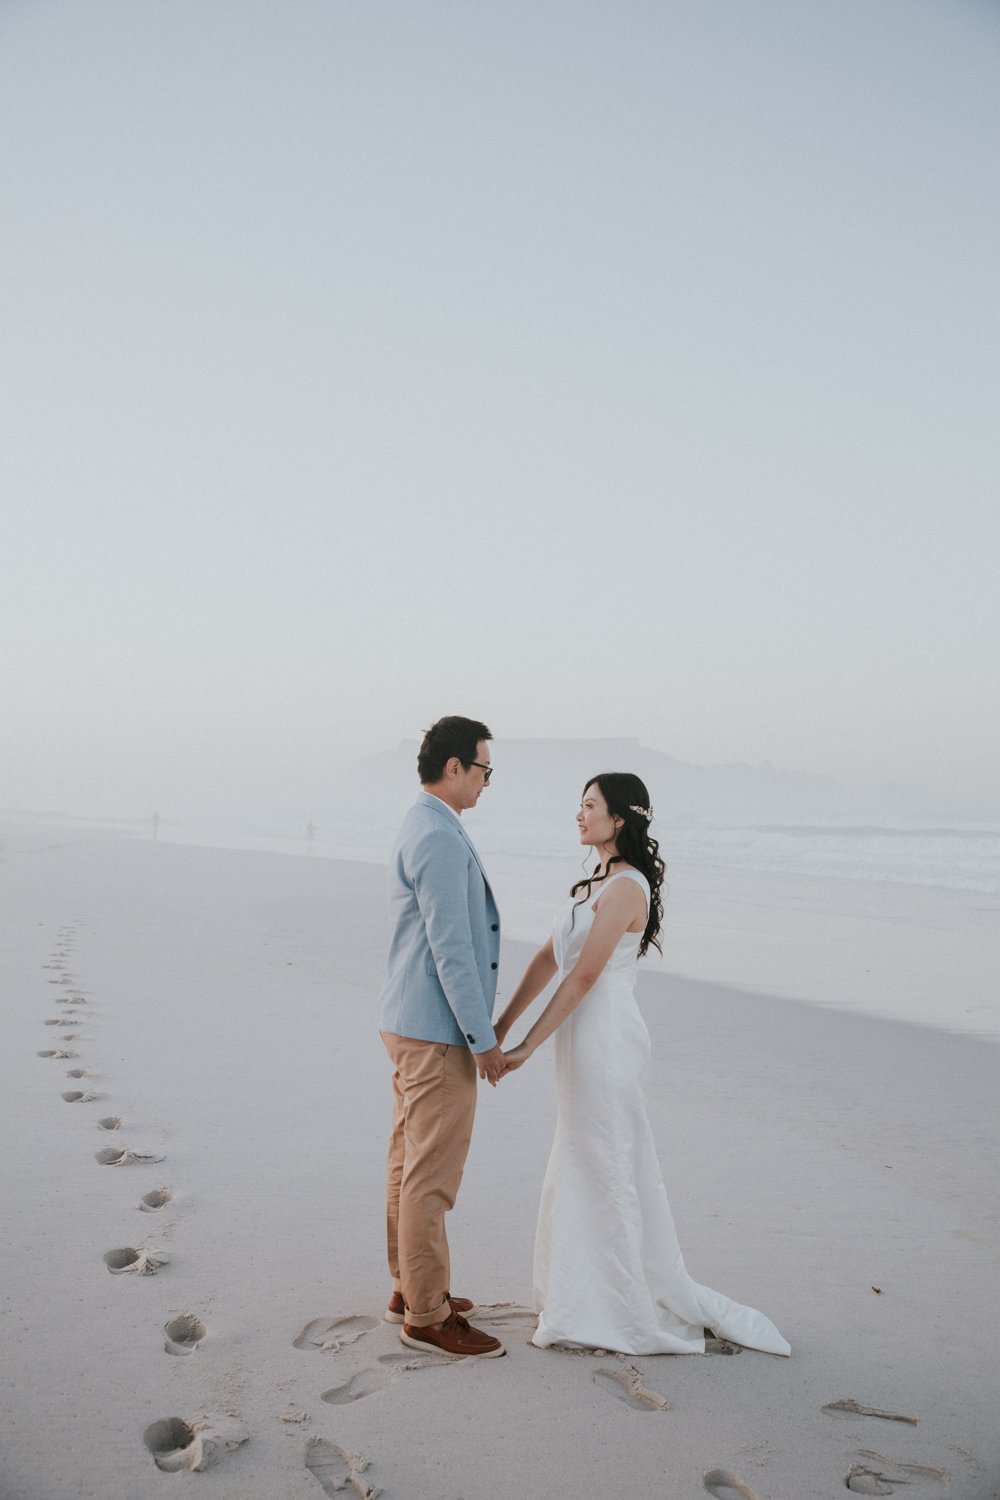 Wedding Shoot in Cape Town - Bianca Asher Photography-7.jpg